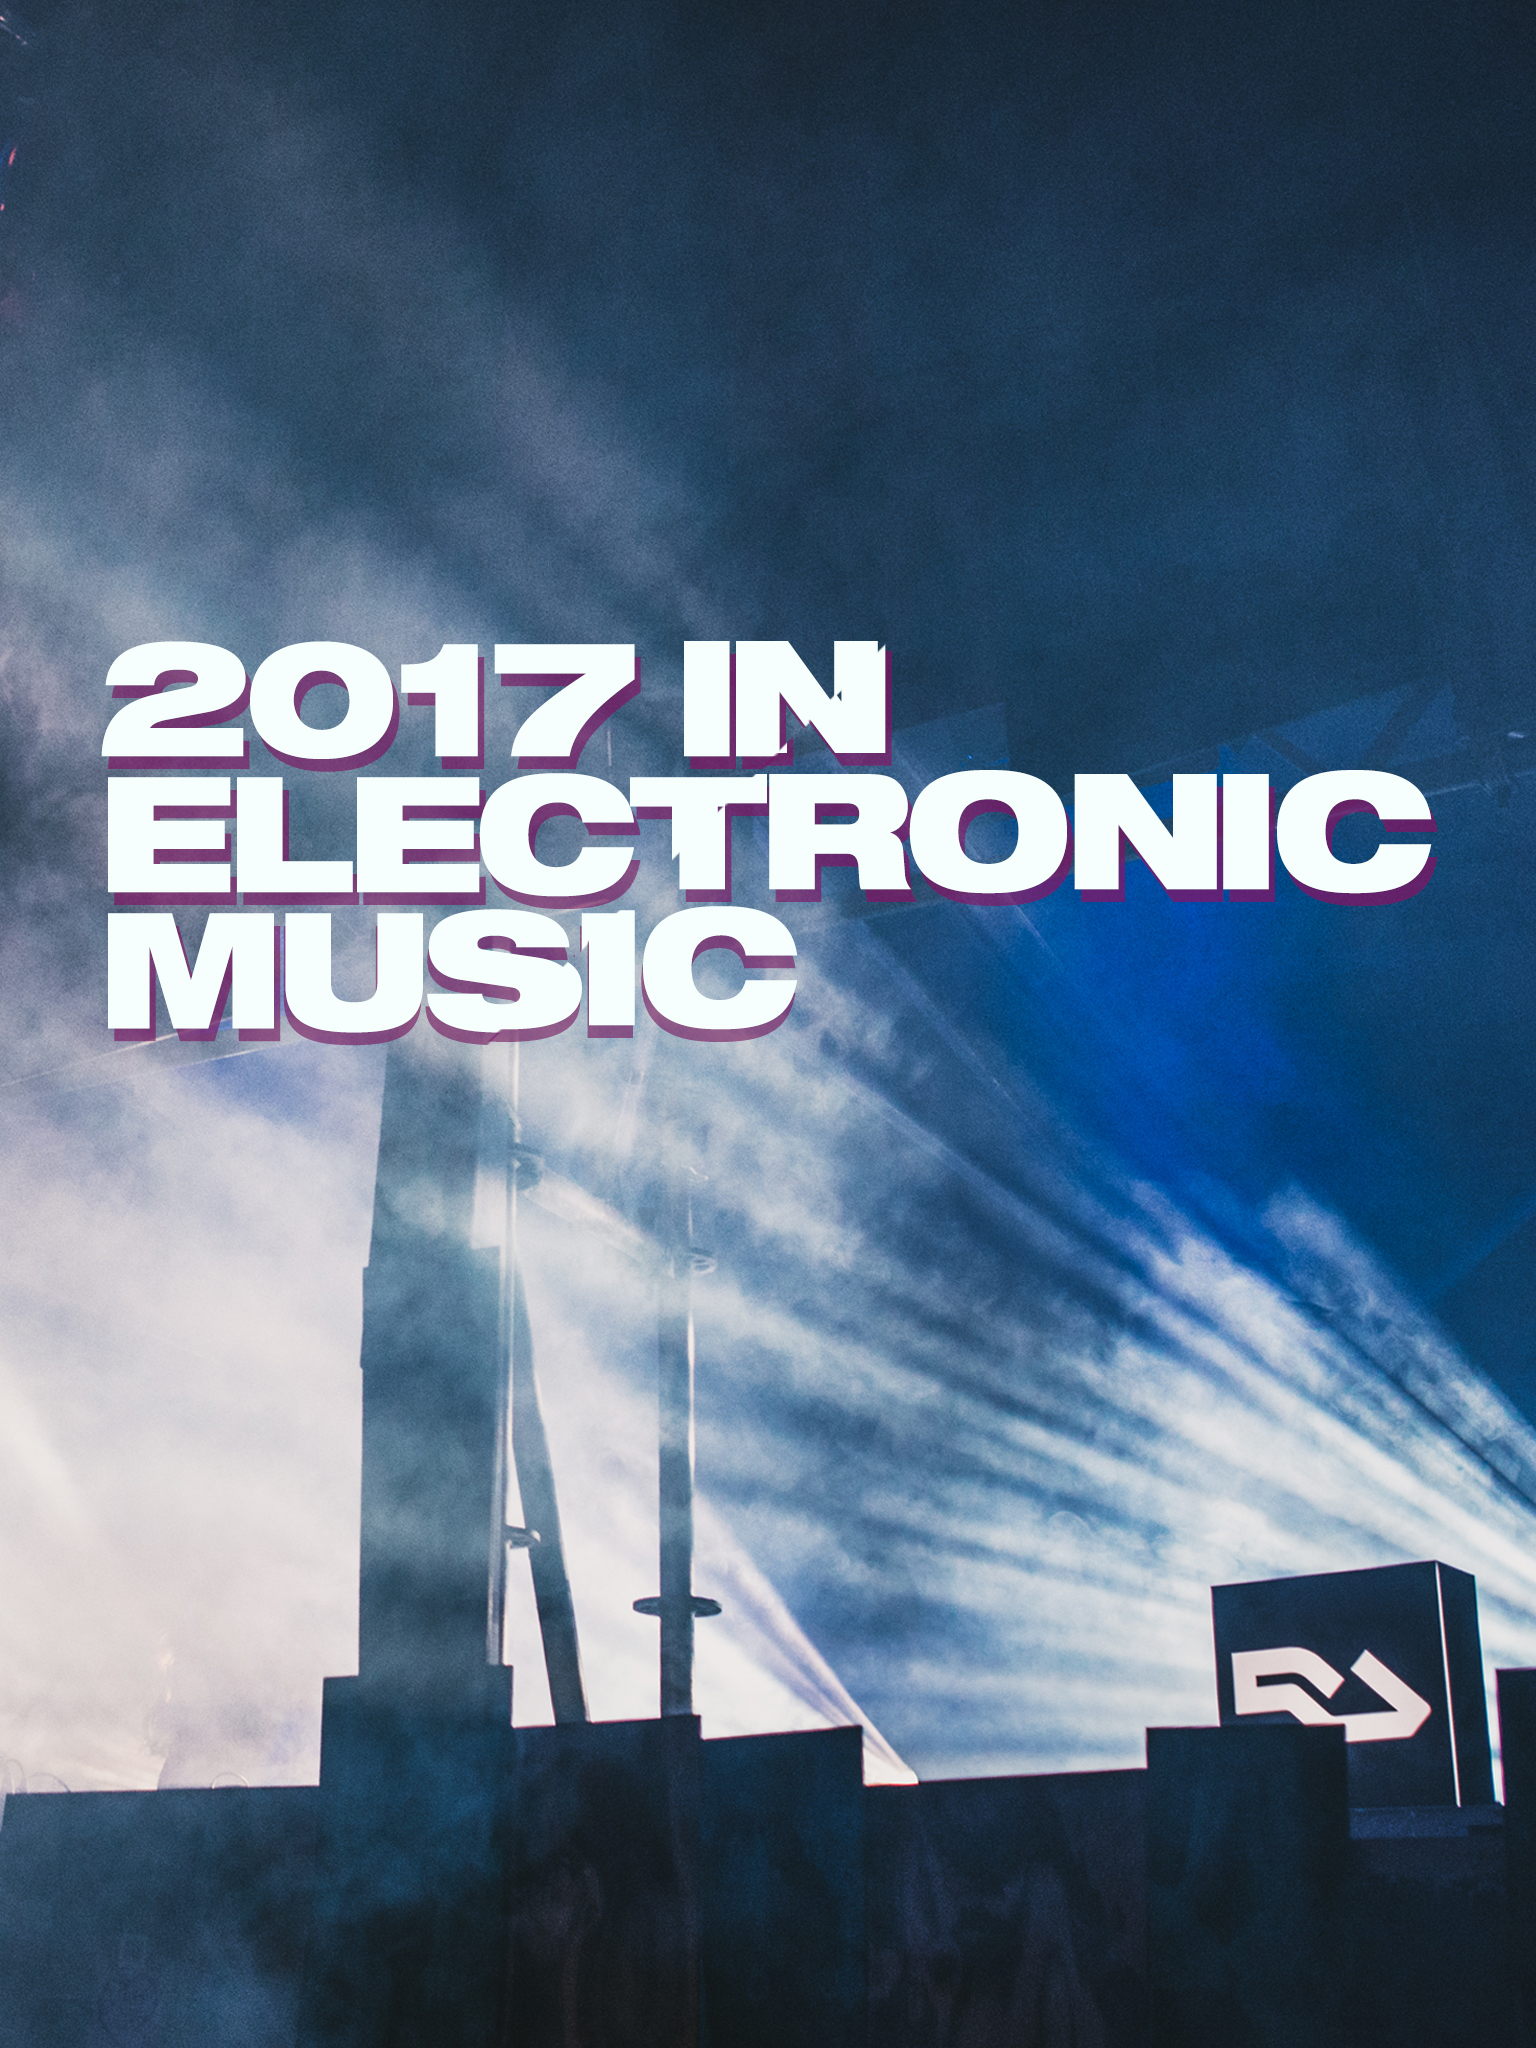 2017 in electronic music